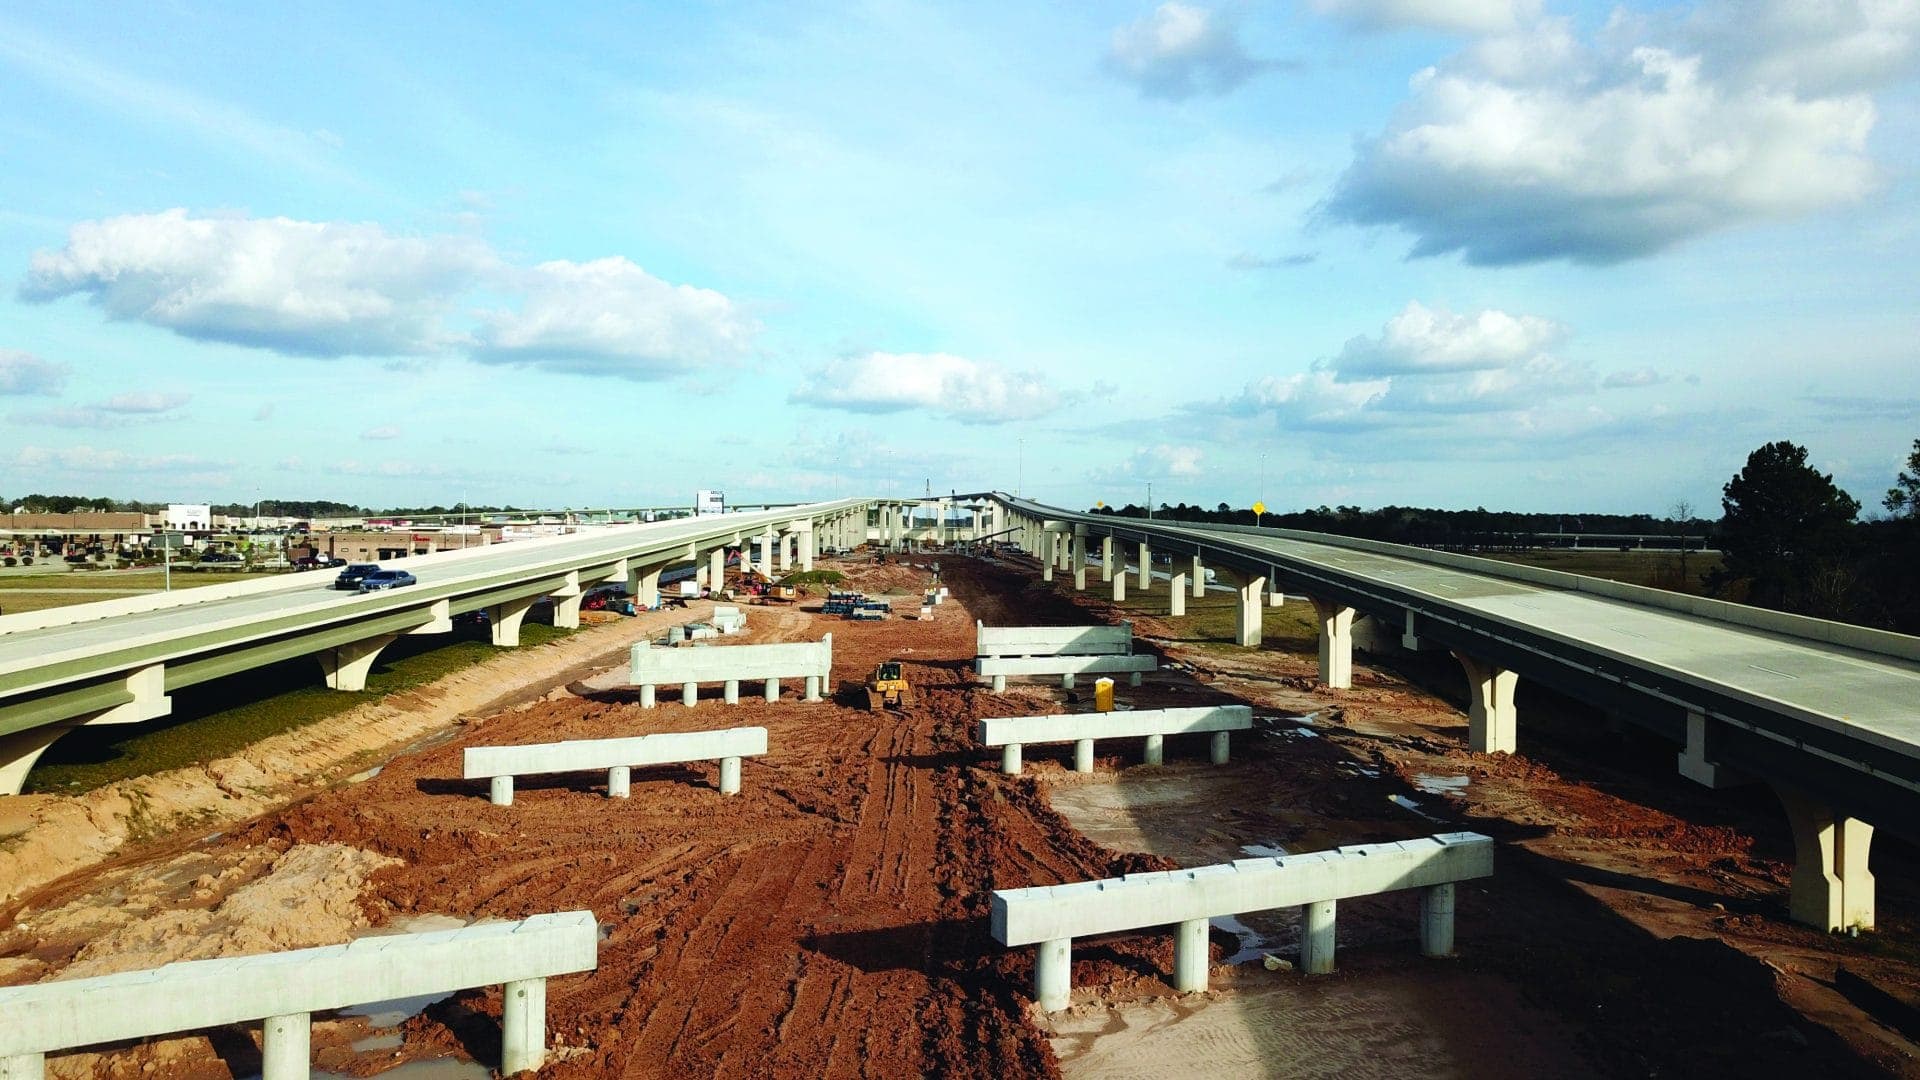 GPI, a joint venture composed of Ferrovial Agroman US, Webber and Granite Constructions on the SH 99 Grand Parkway Project